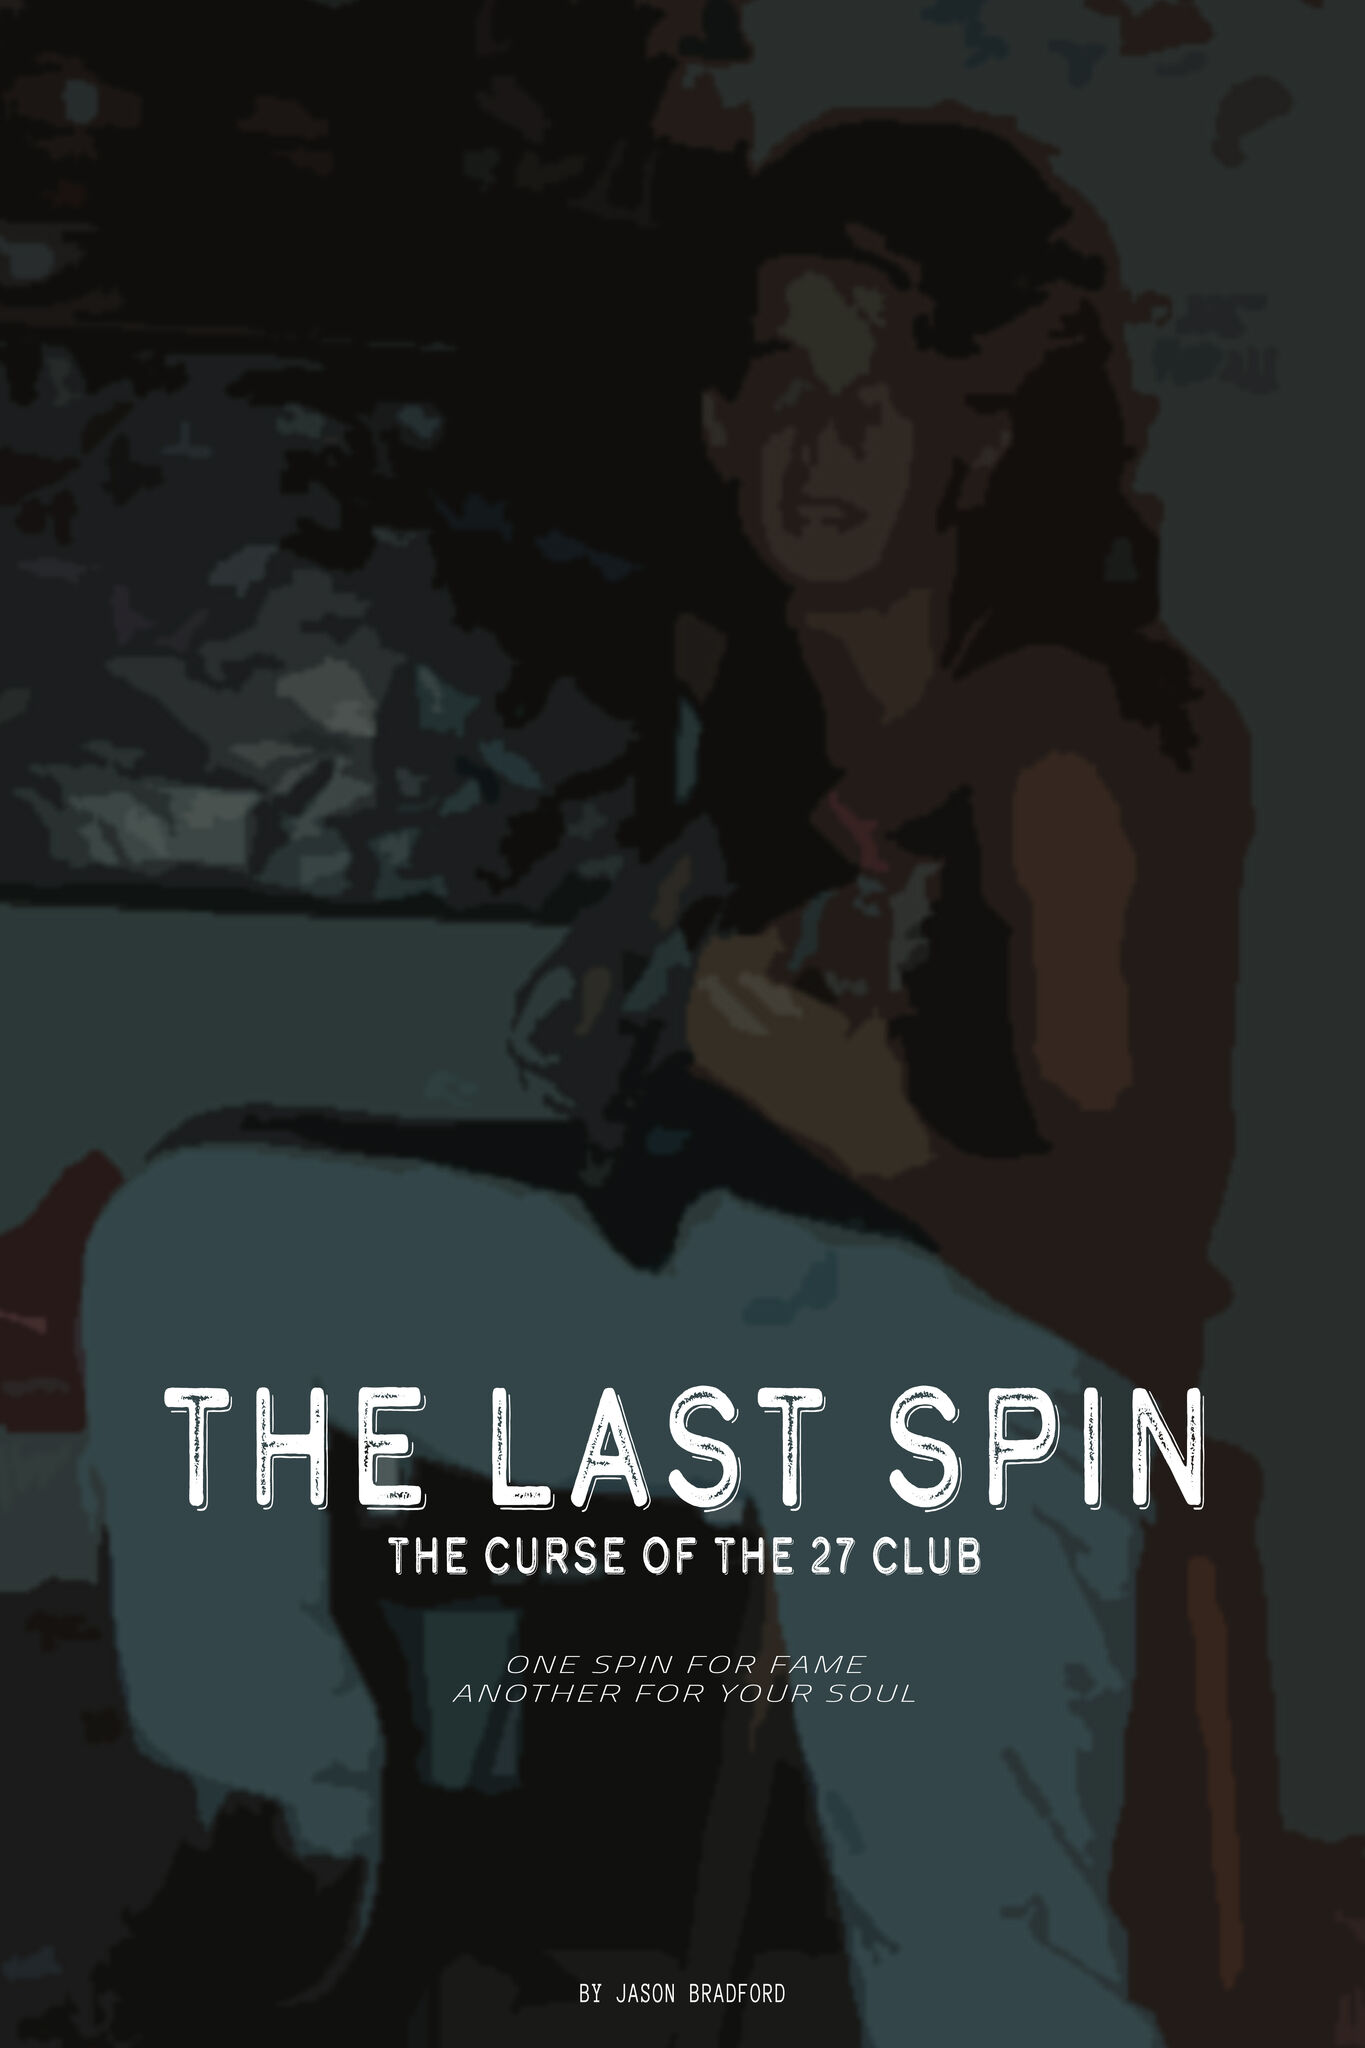 THE LAST SPIN: THE CURSE OF THE 27 CLUB